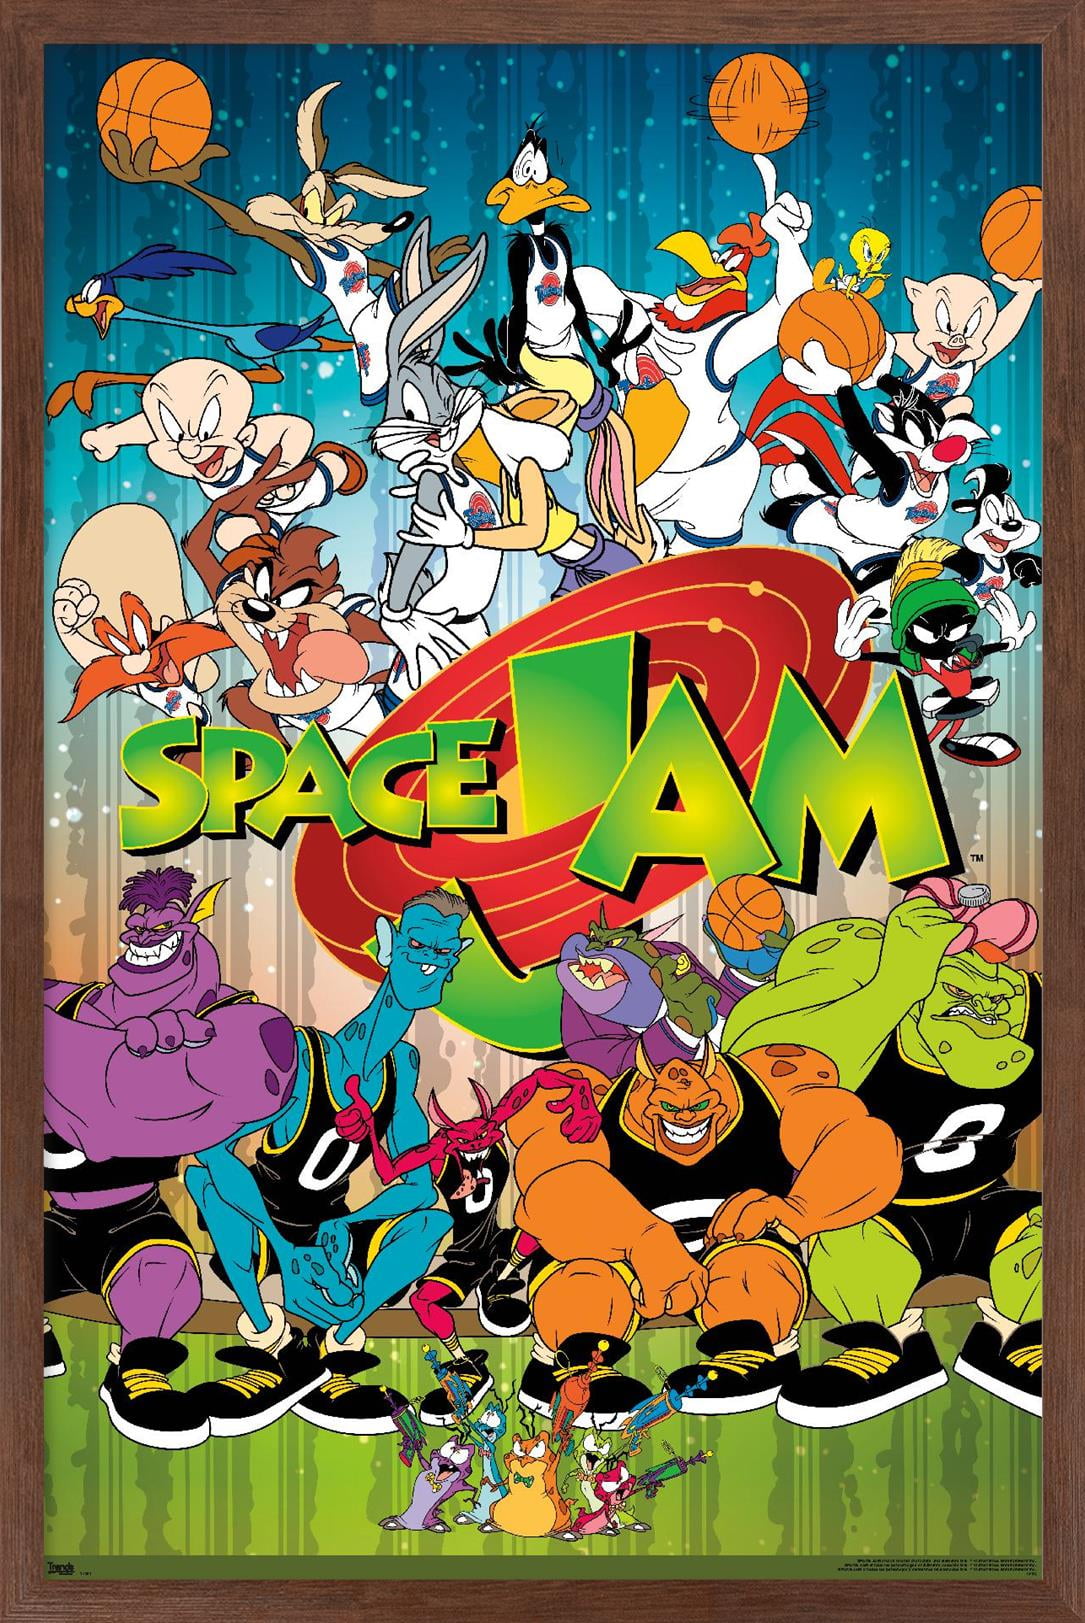 Looney Tunes: Space Jam - Classic Wall Poster, 14.725 x 22.375, Framed 